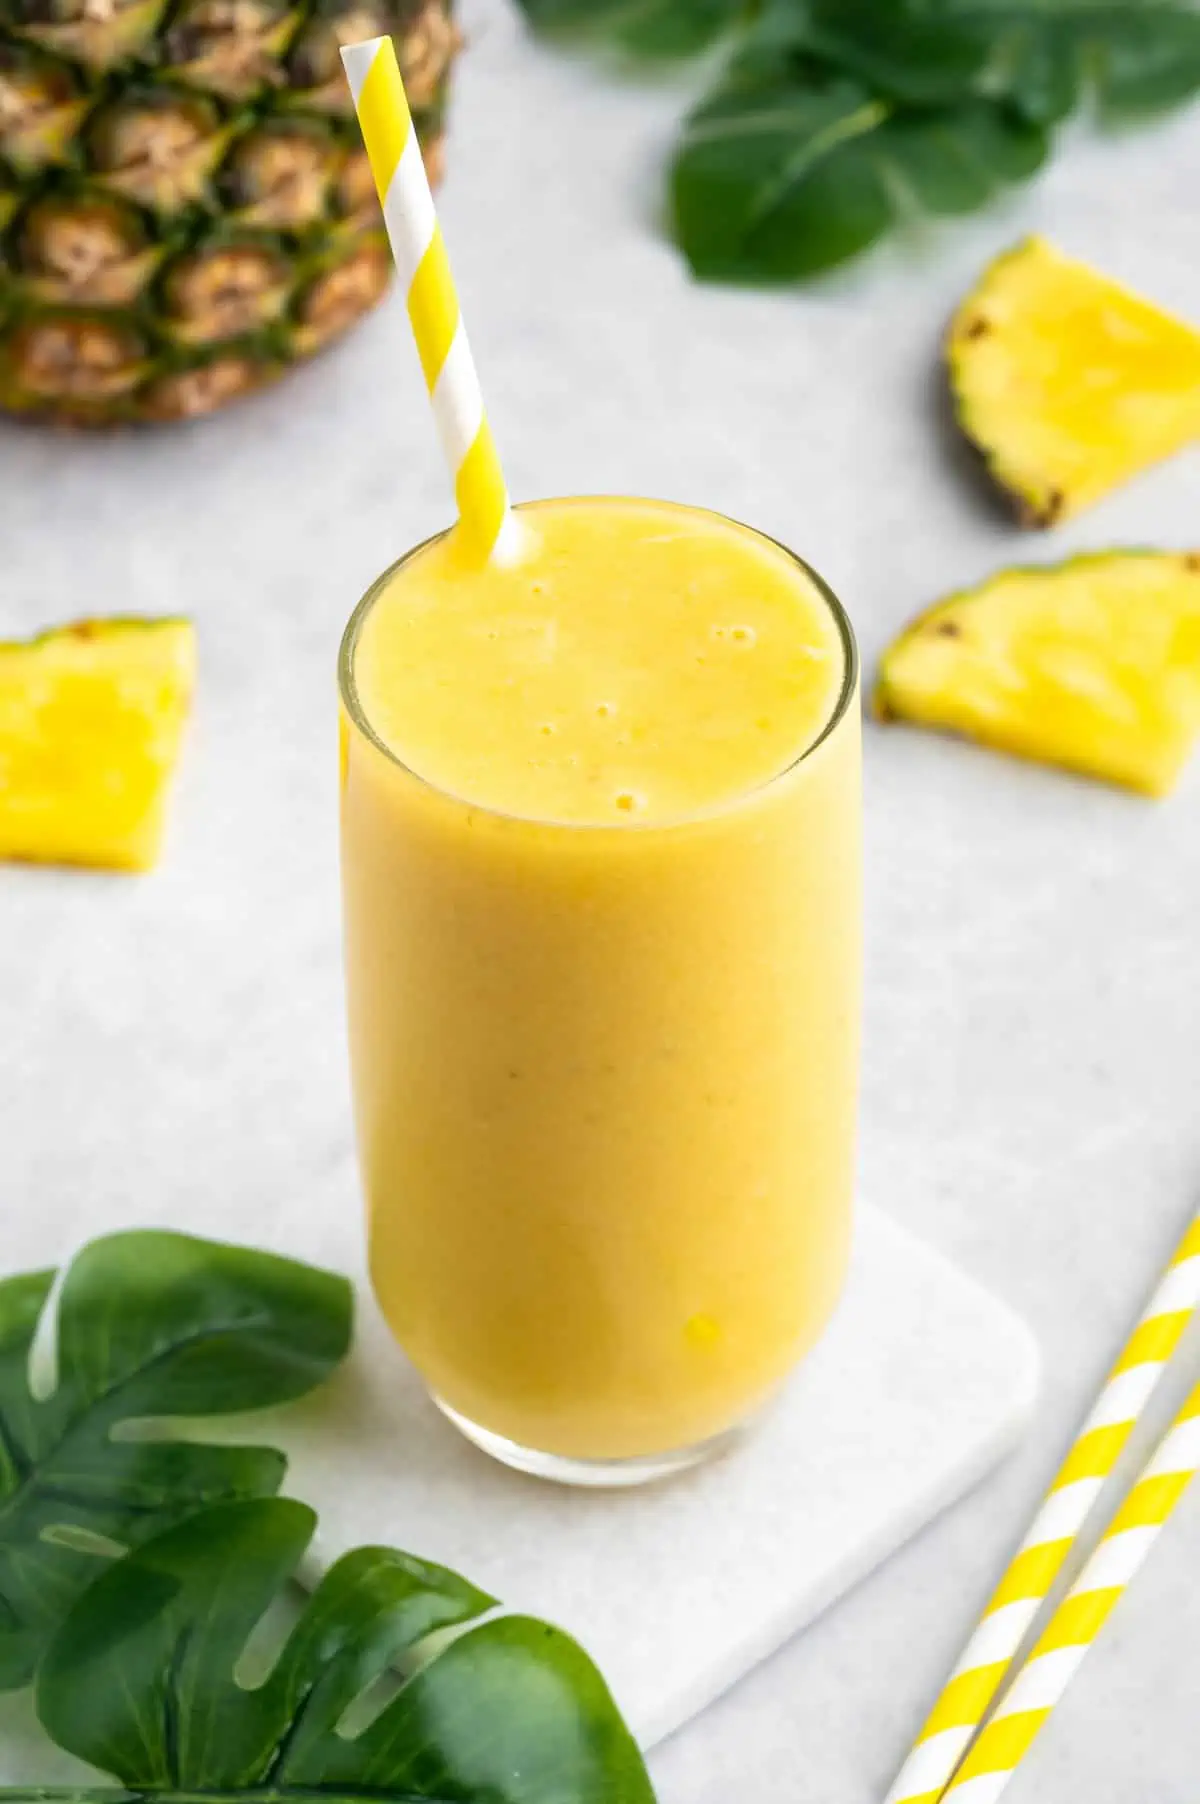 Mango pineapple smoothie in a glass with a straw, surround by slices of pineapple.